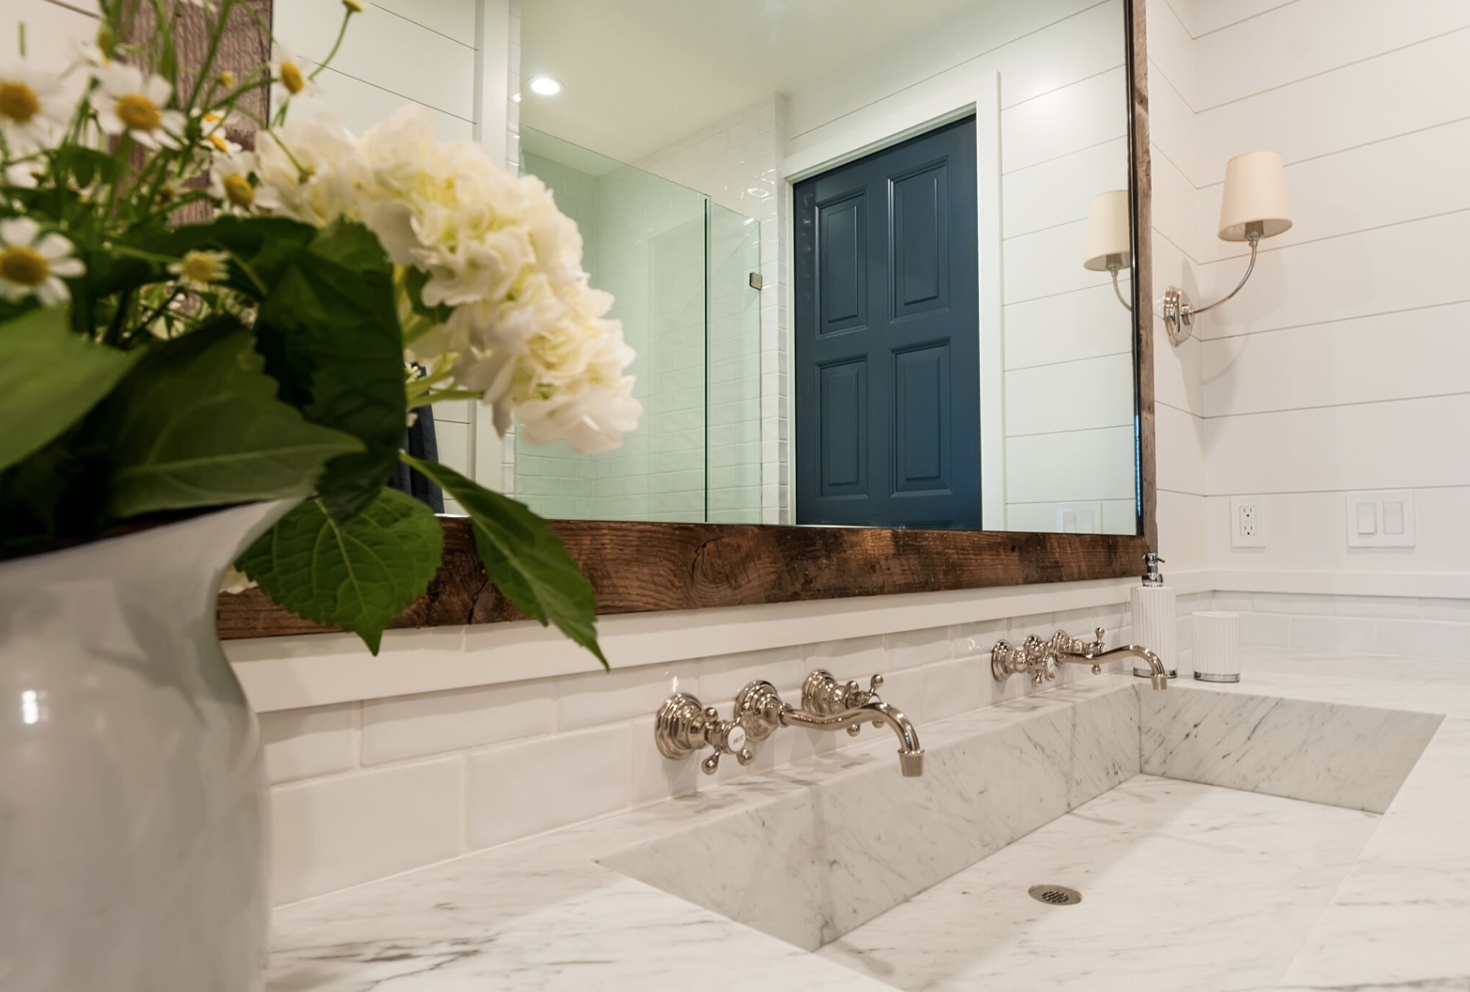 One of the tenets of the modern farmhouse design is including some casual, exposed, industrial features. A great way to introduce this style into your coastal farmhouse bathroom is in the form of an oversized vanity mirror.